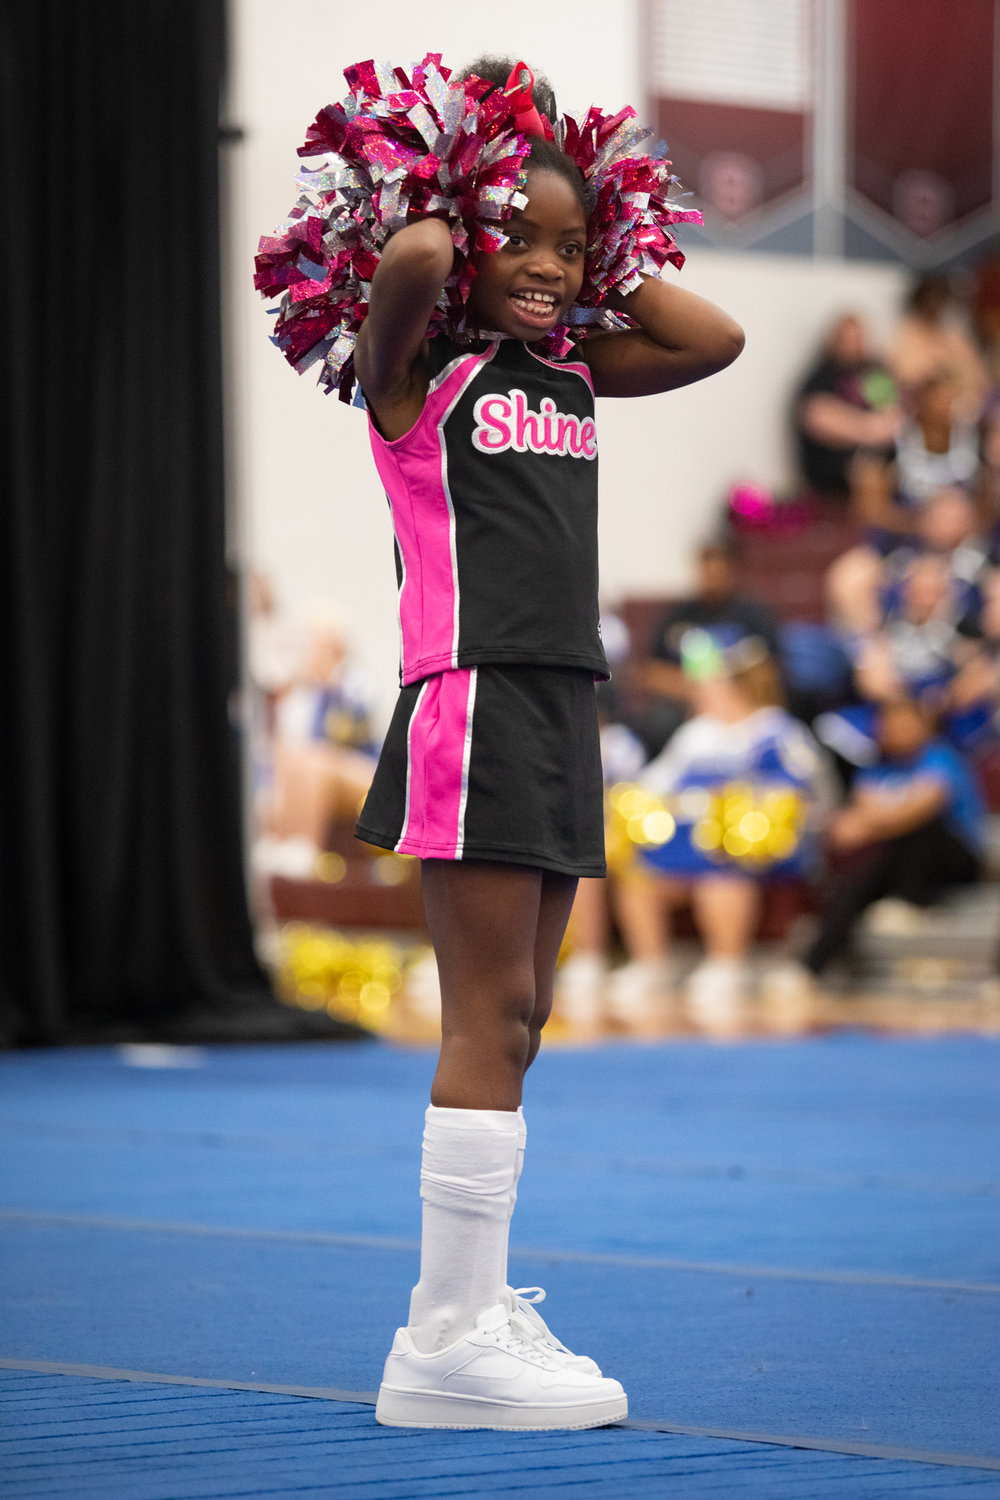 A cheerleader on the Cabarrus Shine smiles and shakes her pompoms for the crowd during her team's performance at the Special Olympics Saturday.